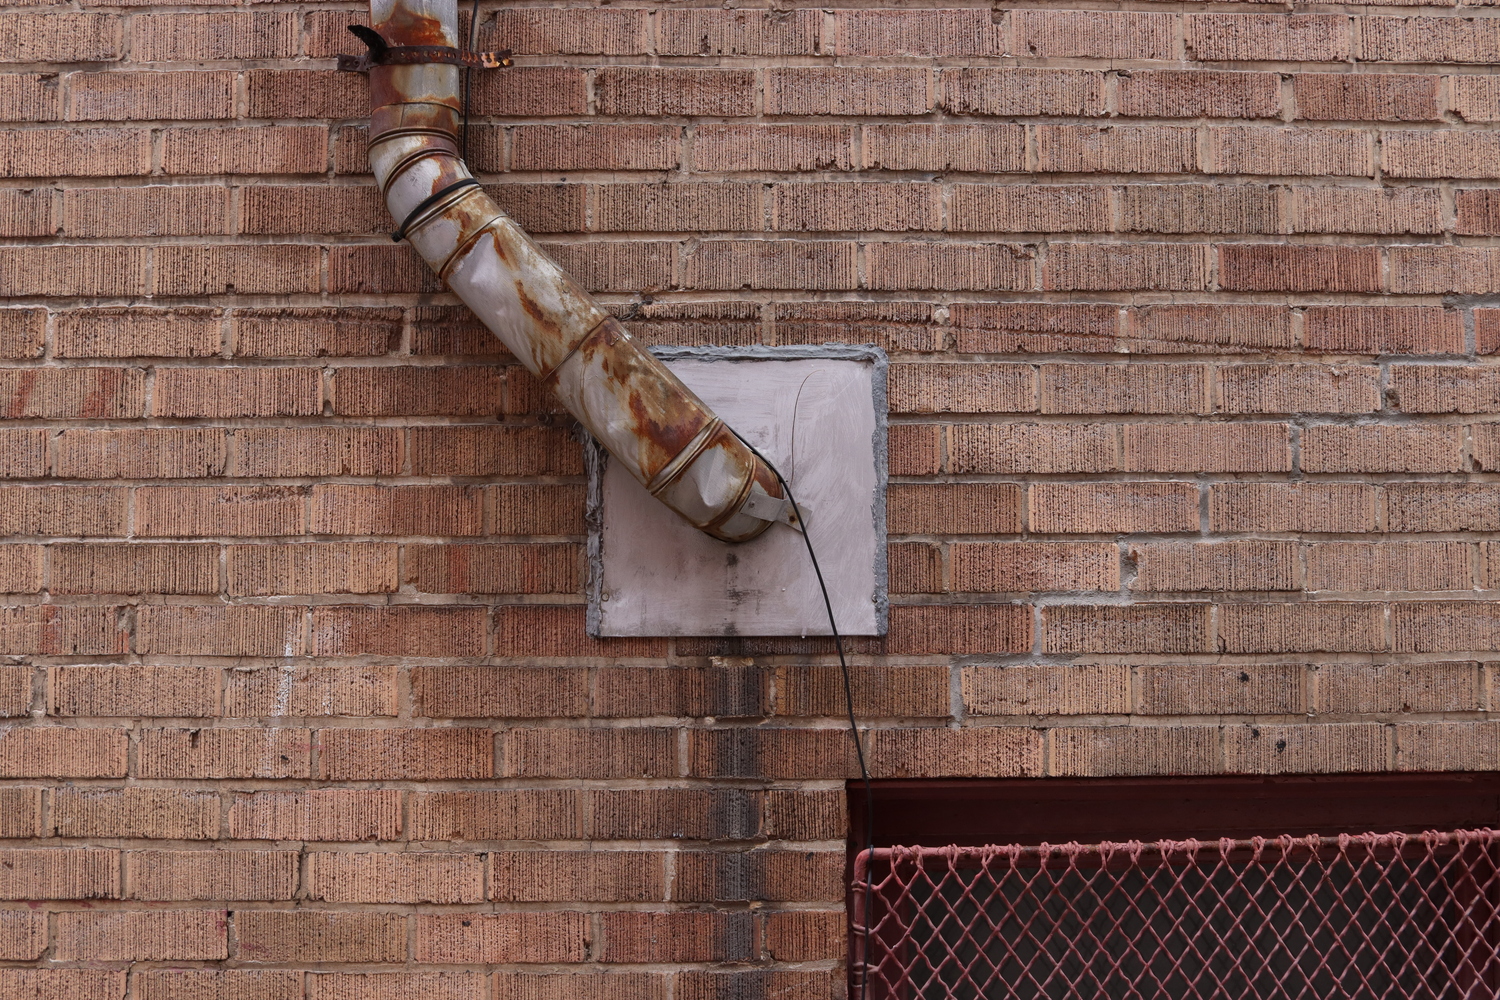 a pipe coming out of a light brown brick wall.
the pipe comes out of a metal square in the centre of the wall,
travels up and left for a bit,
before continuing straight up out of frame.
opposite, in the bottom right,
is the top of a red metal grate in front
of a ground-level window.
the brick below where the pipe enters the wall
is stained dark.